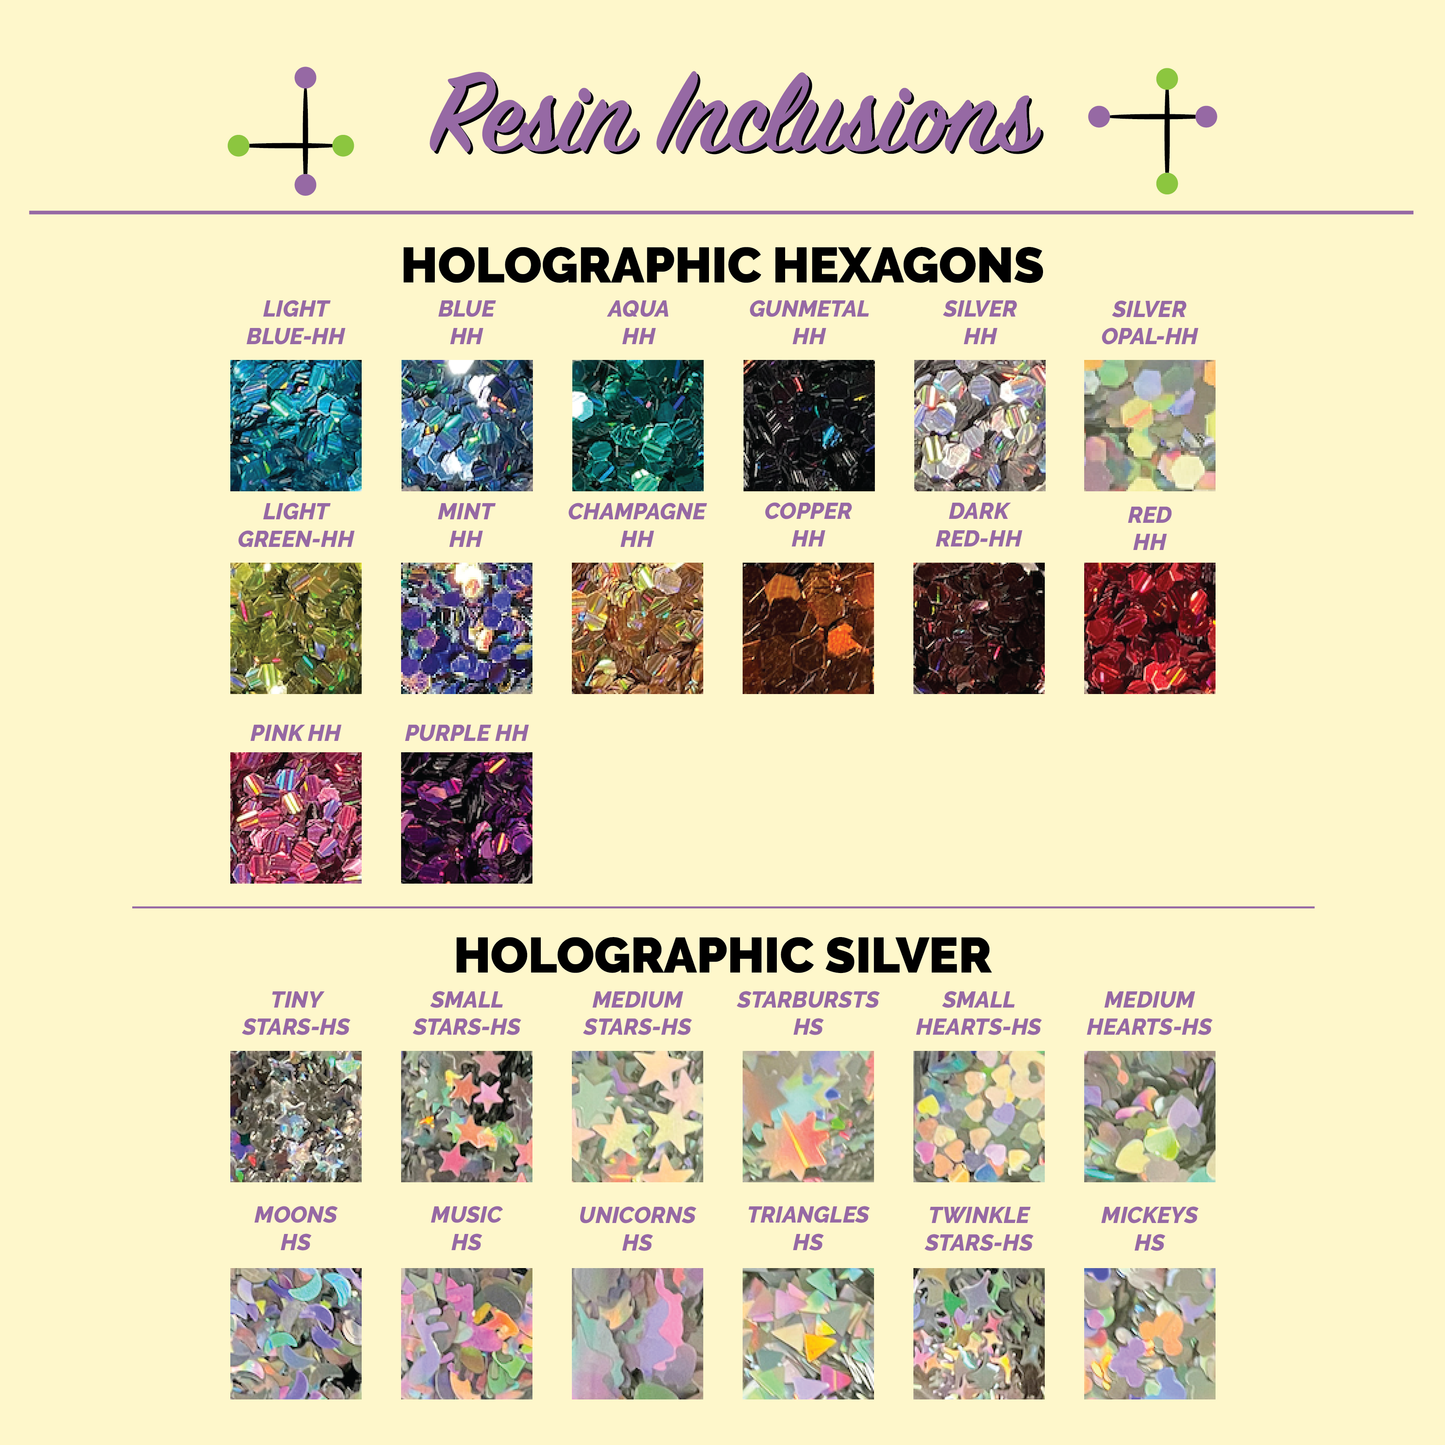 Resin Inclusions - holographic hexagons and silver shapes